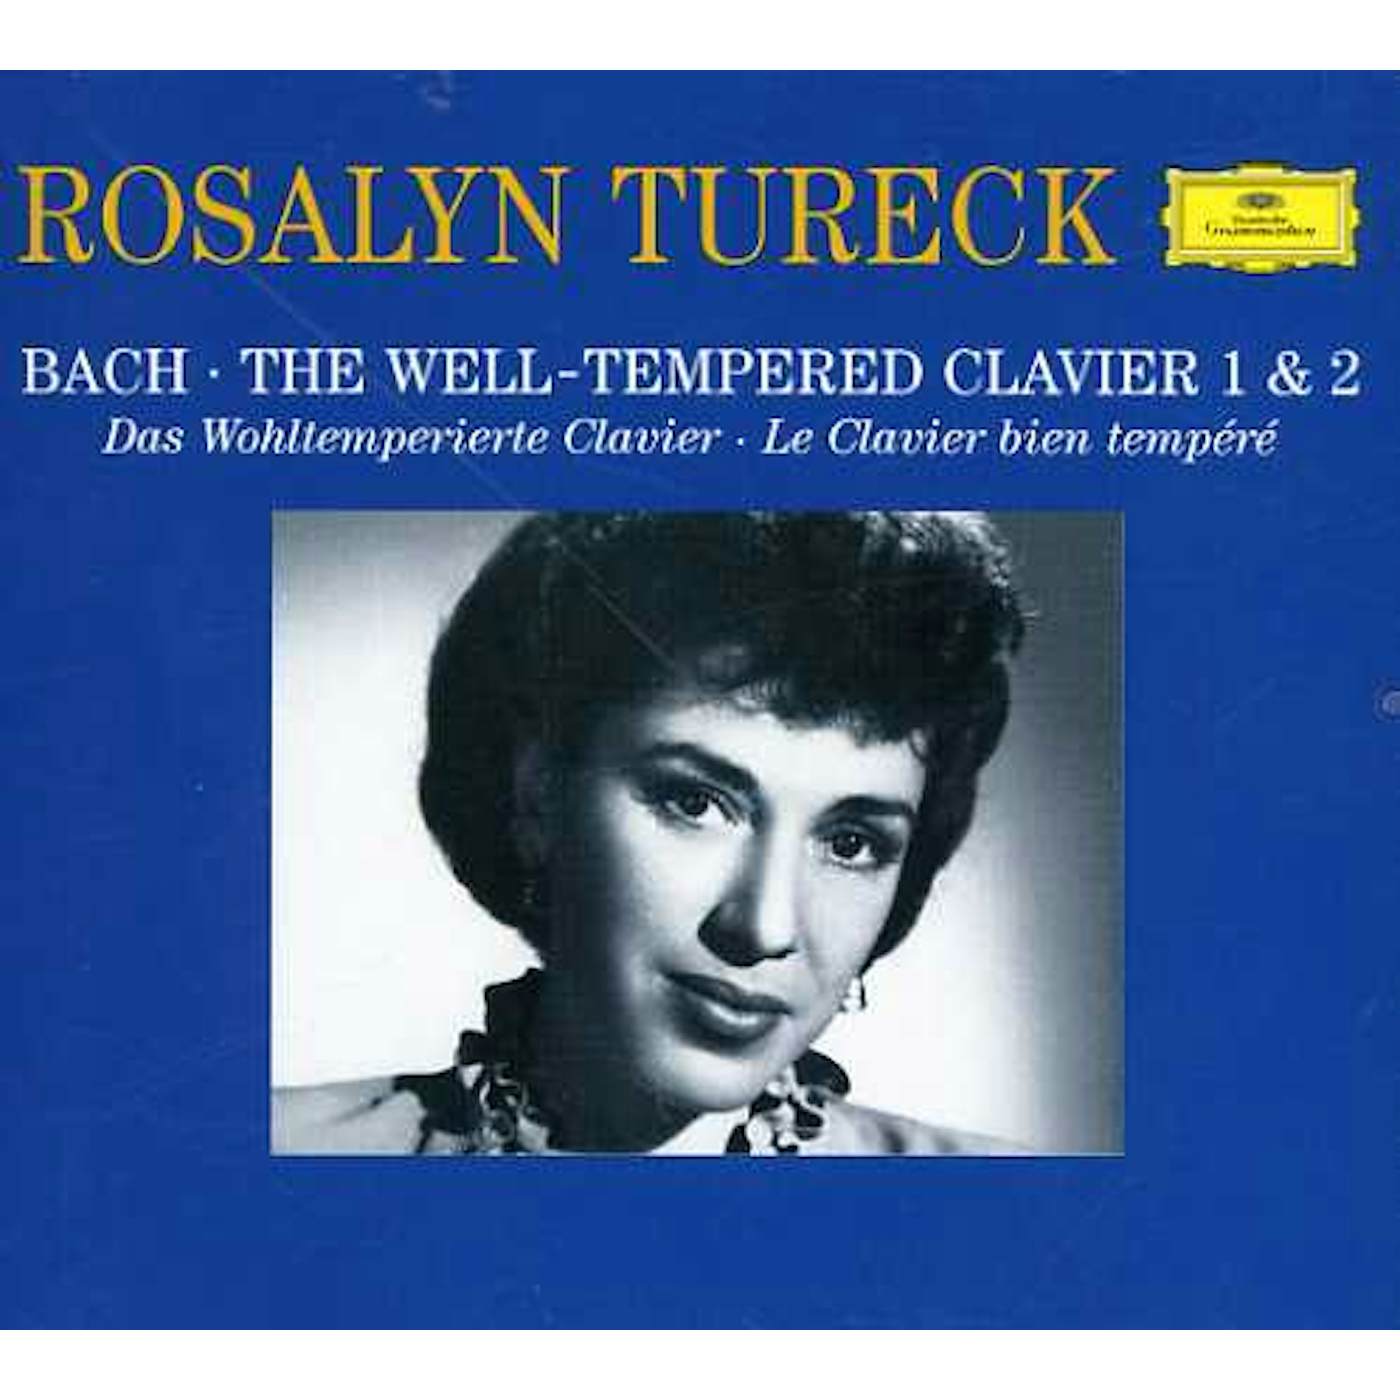 Rosalyn Tureck PLAYS BACH: WELL-TEMPERED CLAVIER 1 & 2 CD